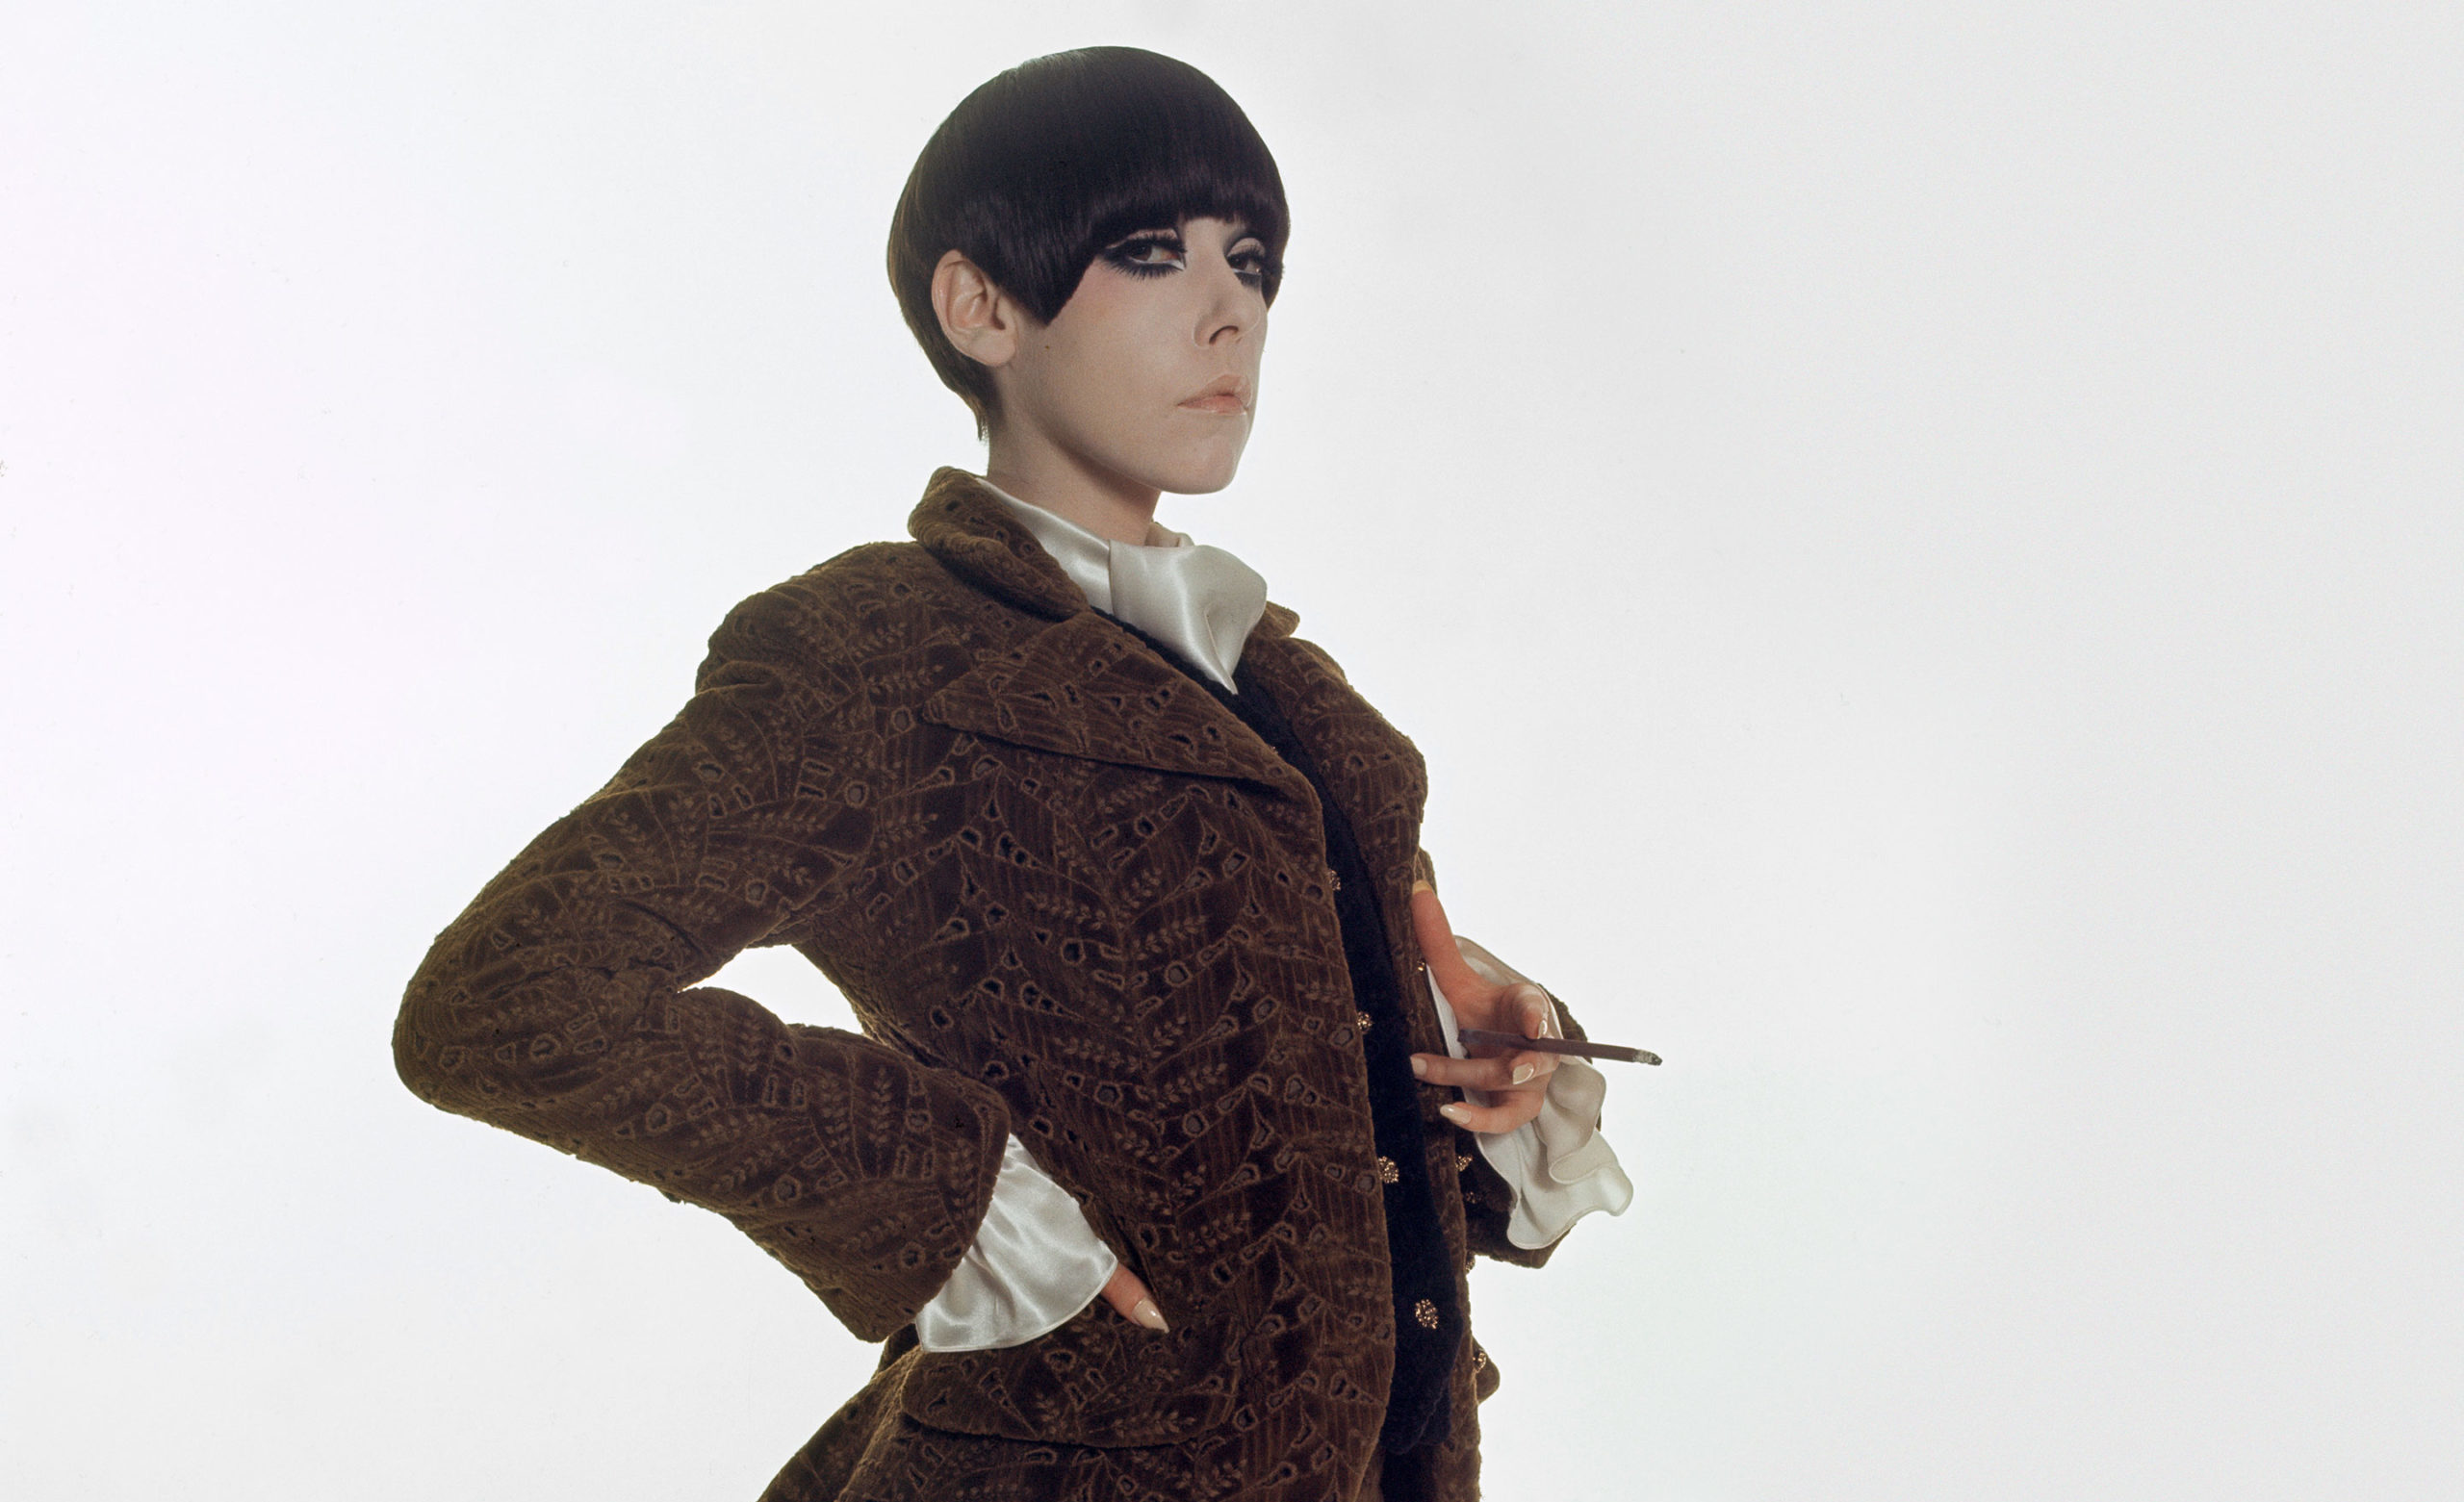 Peggy Moffitt modeling George Sand pantsuit designed by Rudi Gernreich, Fall 1967 Collection. Photograph © William Claxton, LLC, courtesy of Demont Photo Management & Fahey/Klein Gallery Los Angeles, with permission of the Rudi Gernreich trademark.